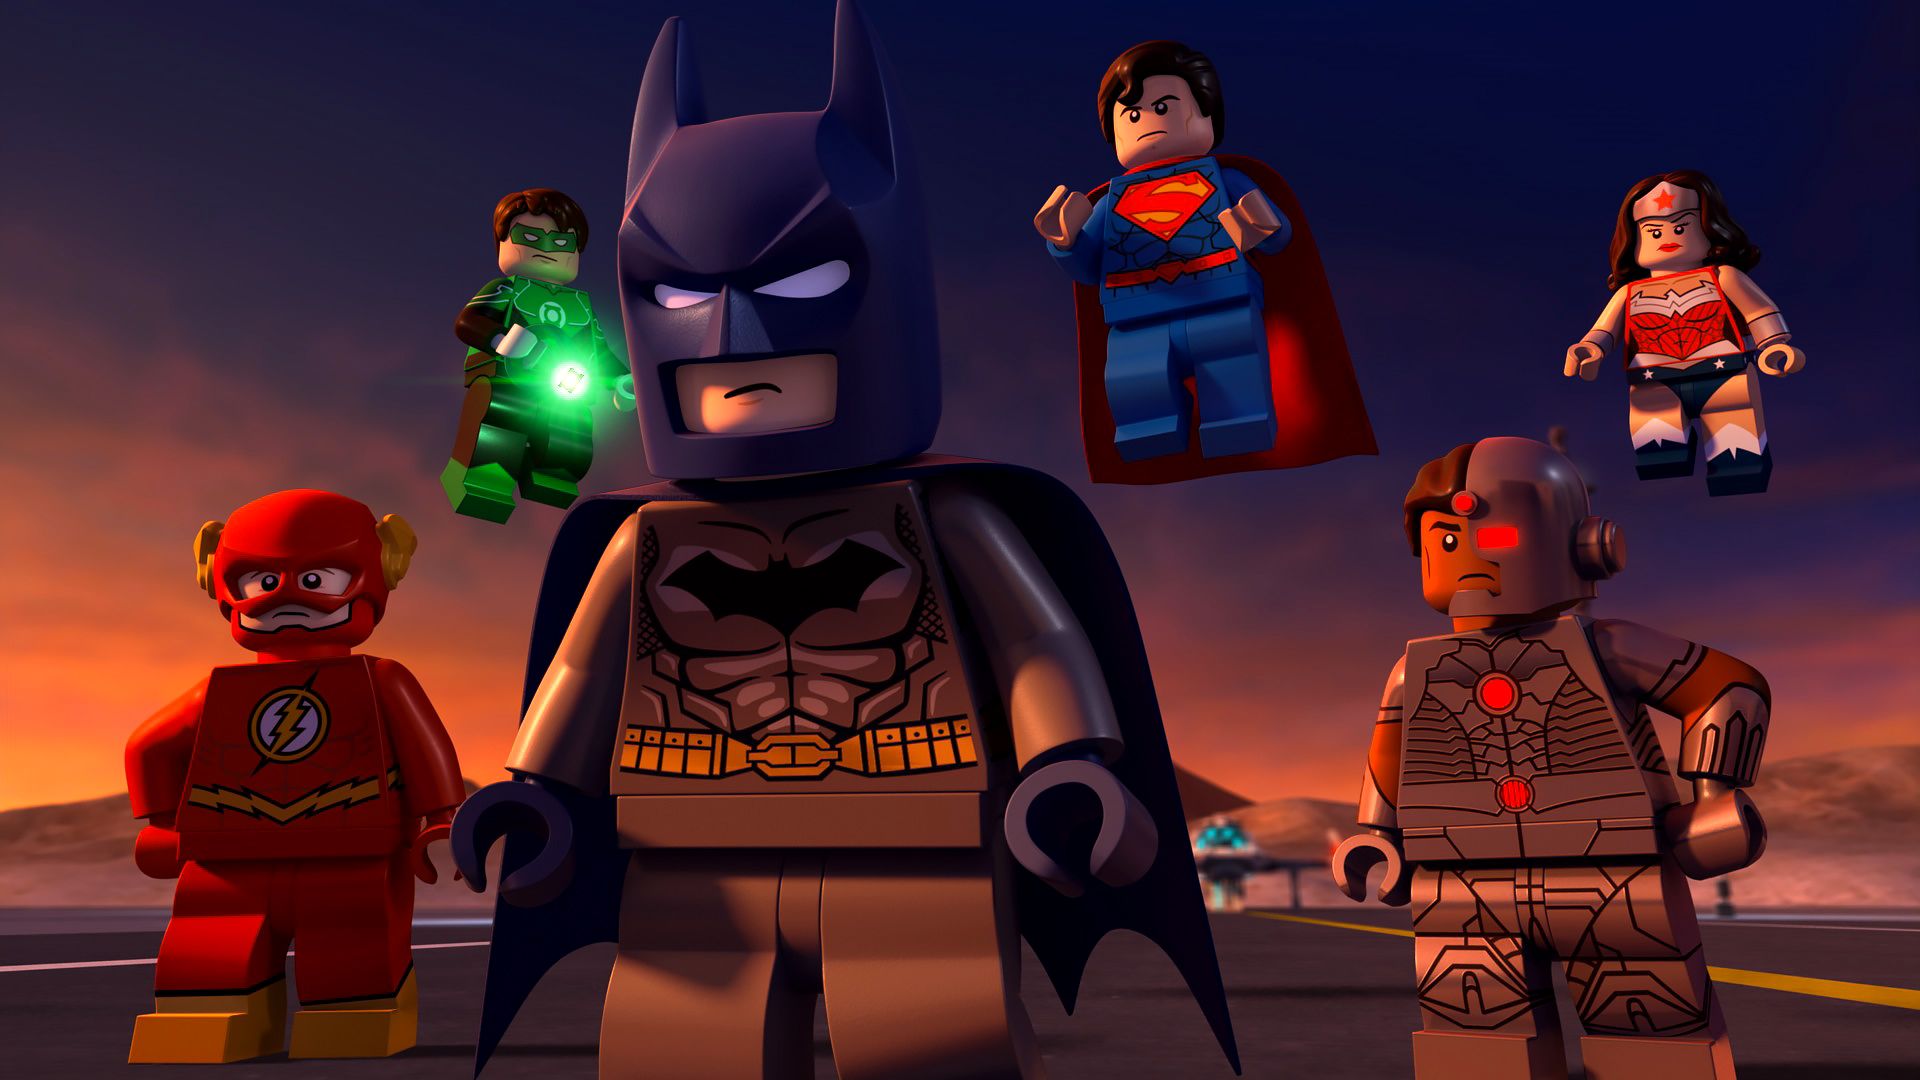 Lego DC Super Heroes: Justice League - Attack of the Legion of Doom! background